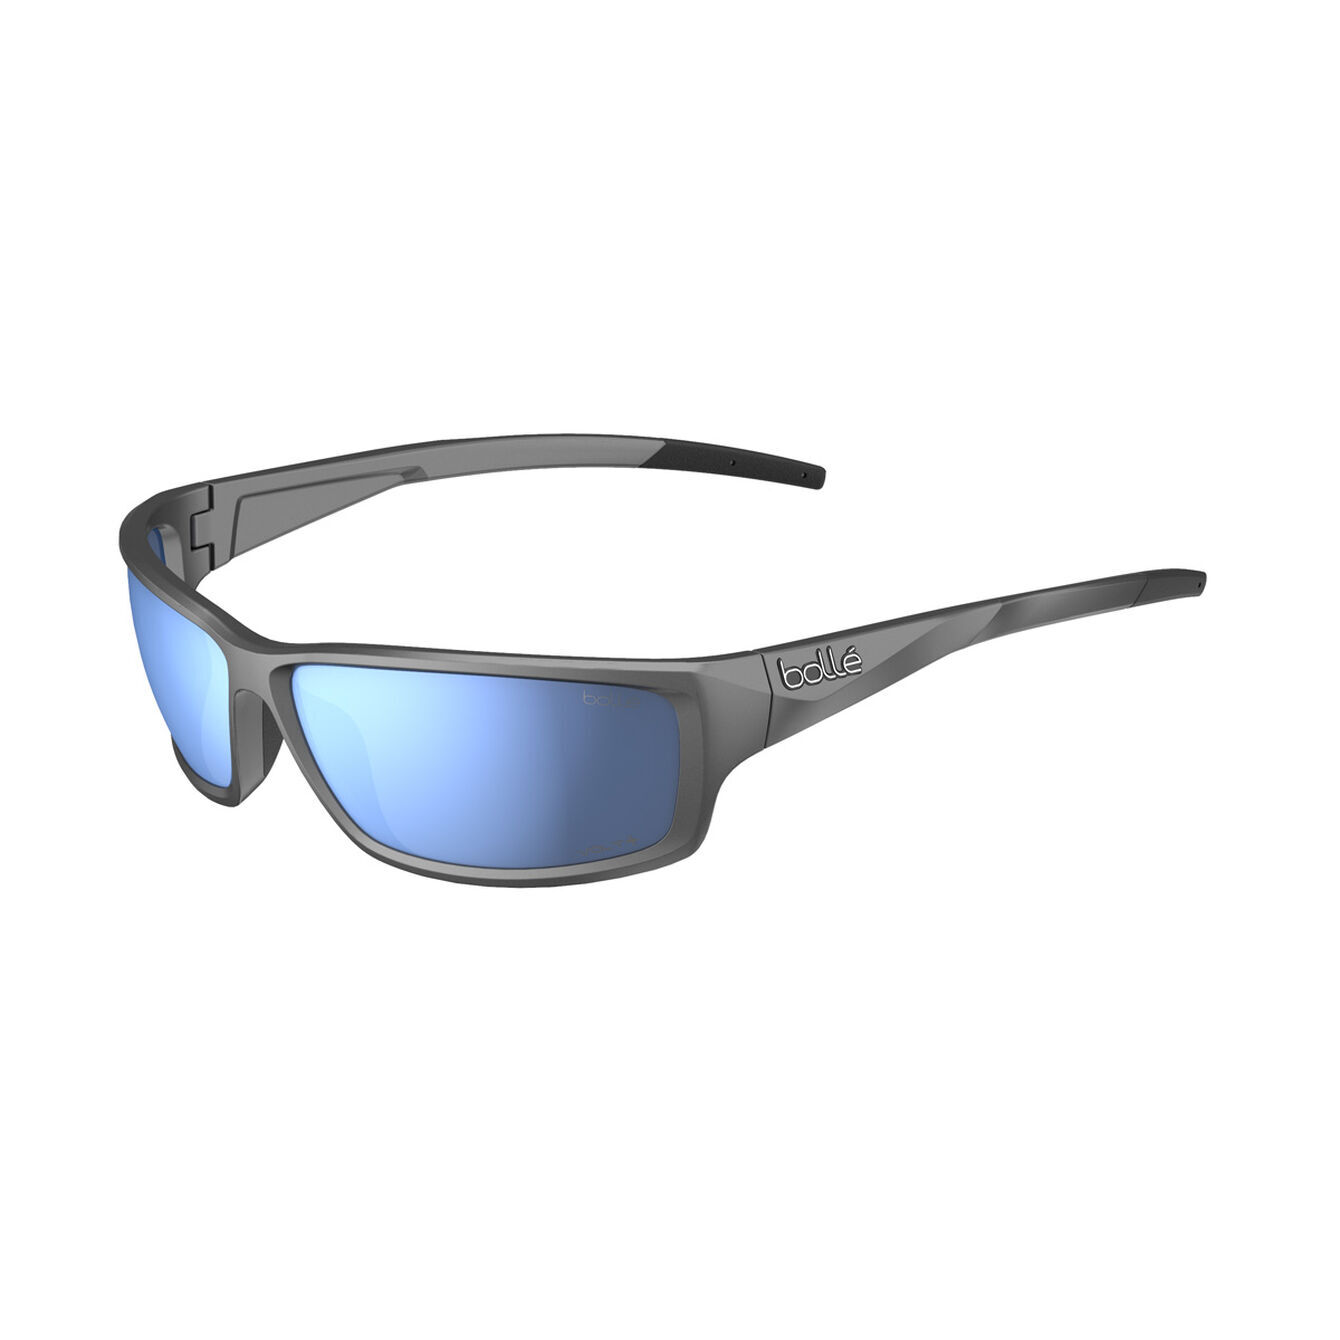 Bolle Spiral Polarized Sunglasses | Big 5 Sporting Goods